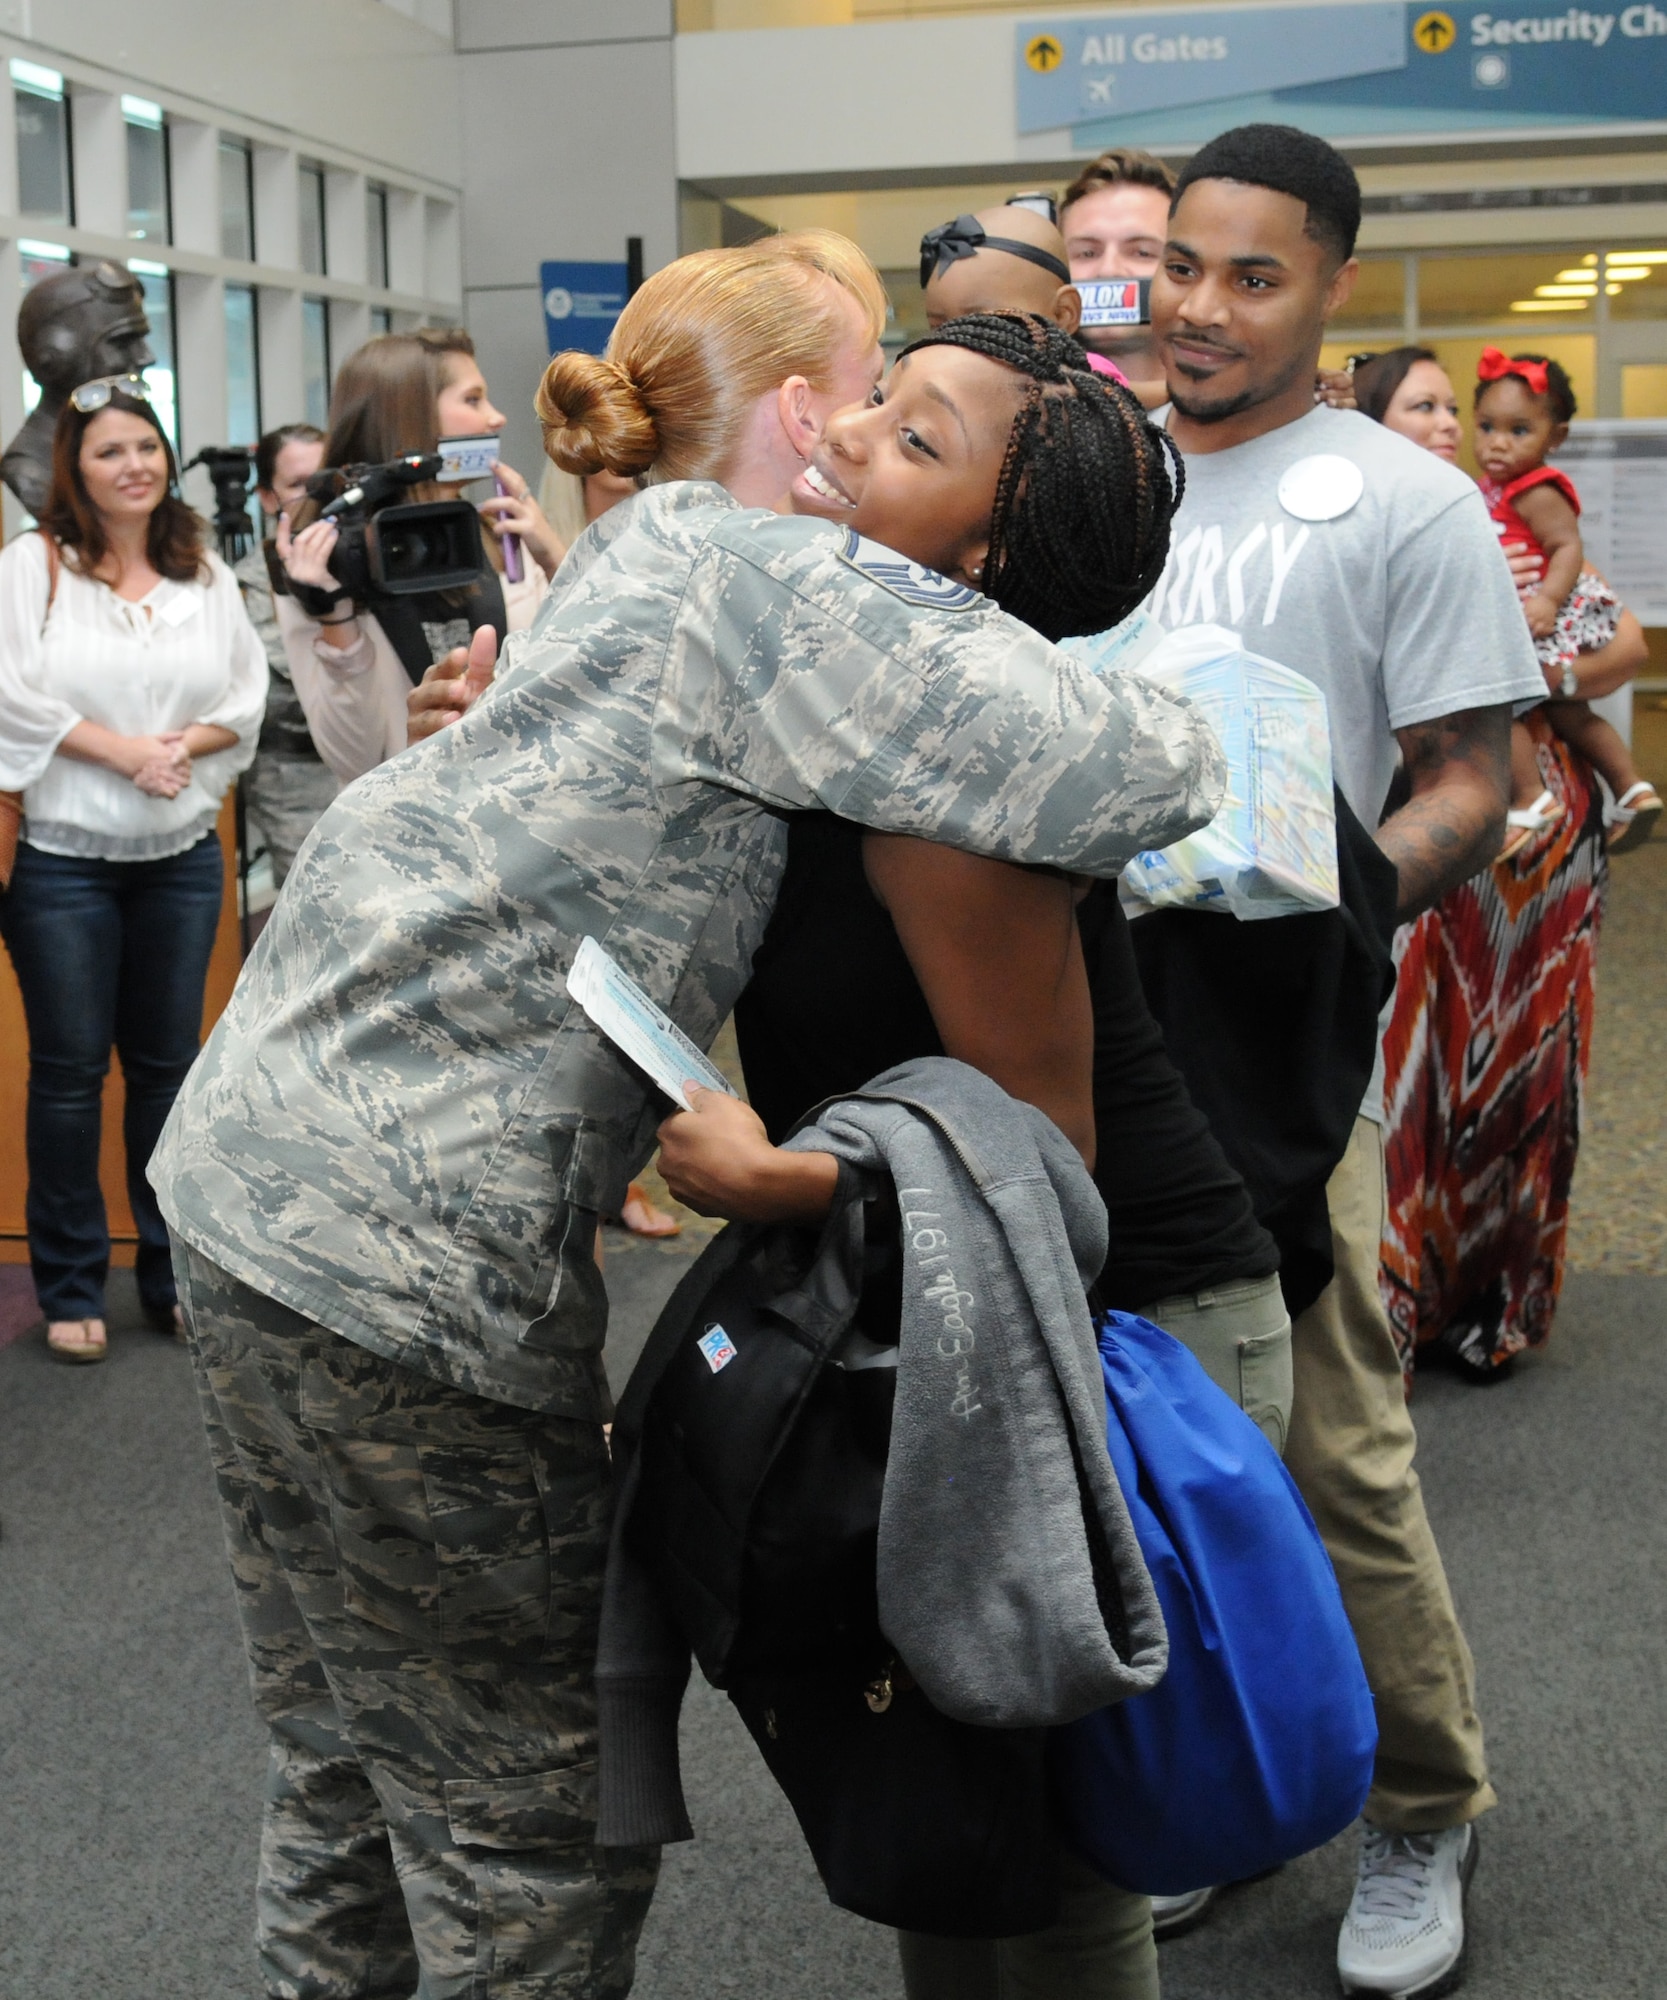 Master Sgt. Krista Mercadel, 81st Force Support Squadron military personnel section superintendent, hugs Staff Sgt. Devanie Rainey, 81st FSS customer support supervisor, upon her arrival to the Gulfport-Biloxi International Airport Oct. 14, 2016, Gulfport, Miss. The Make-A-Wish Foundation flew the Rainey family to Disney World after their daughter, Saniya, was diagnosed with germ cell tumors. (U.S. Air Force photo by Kemberly Groue/Released)